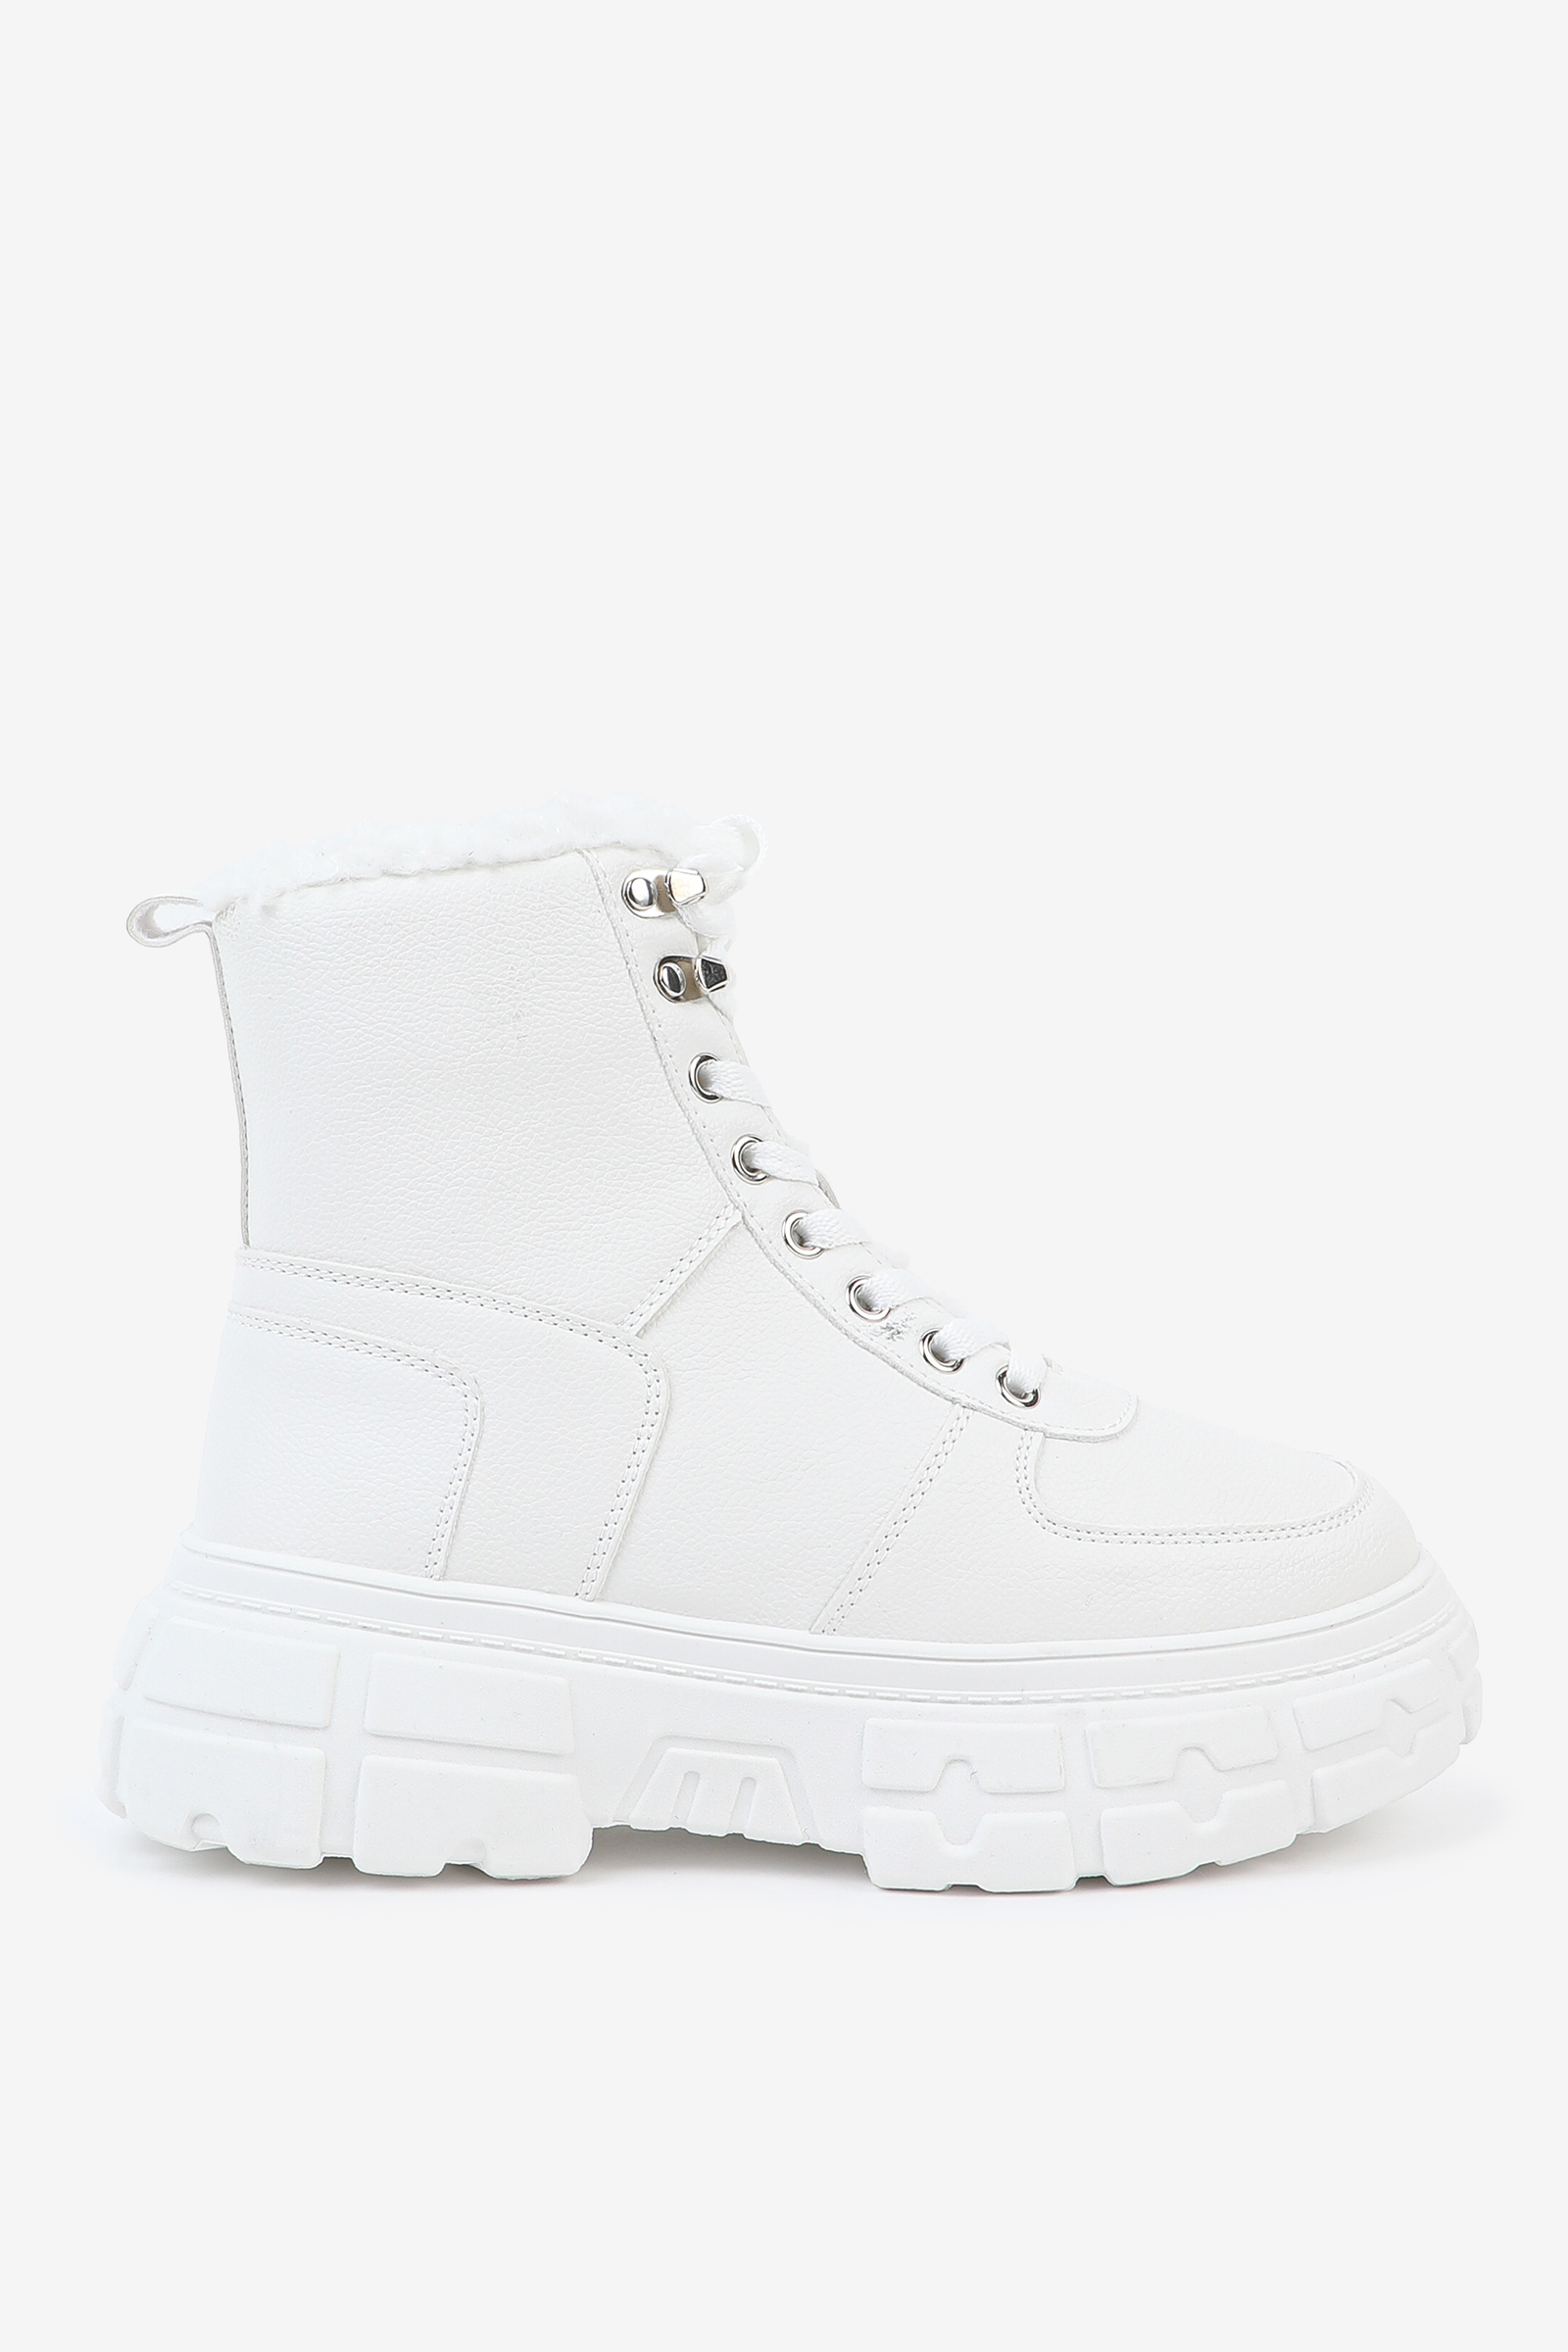 Ardene Faux Fur Lined High Top Sneakers in White | Size 9 | Faux Leather/Rubber